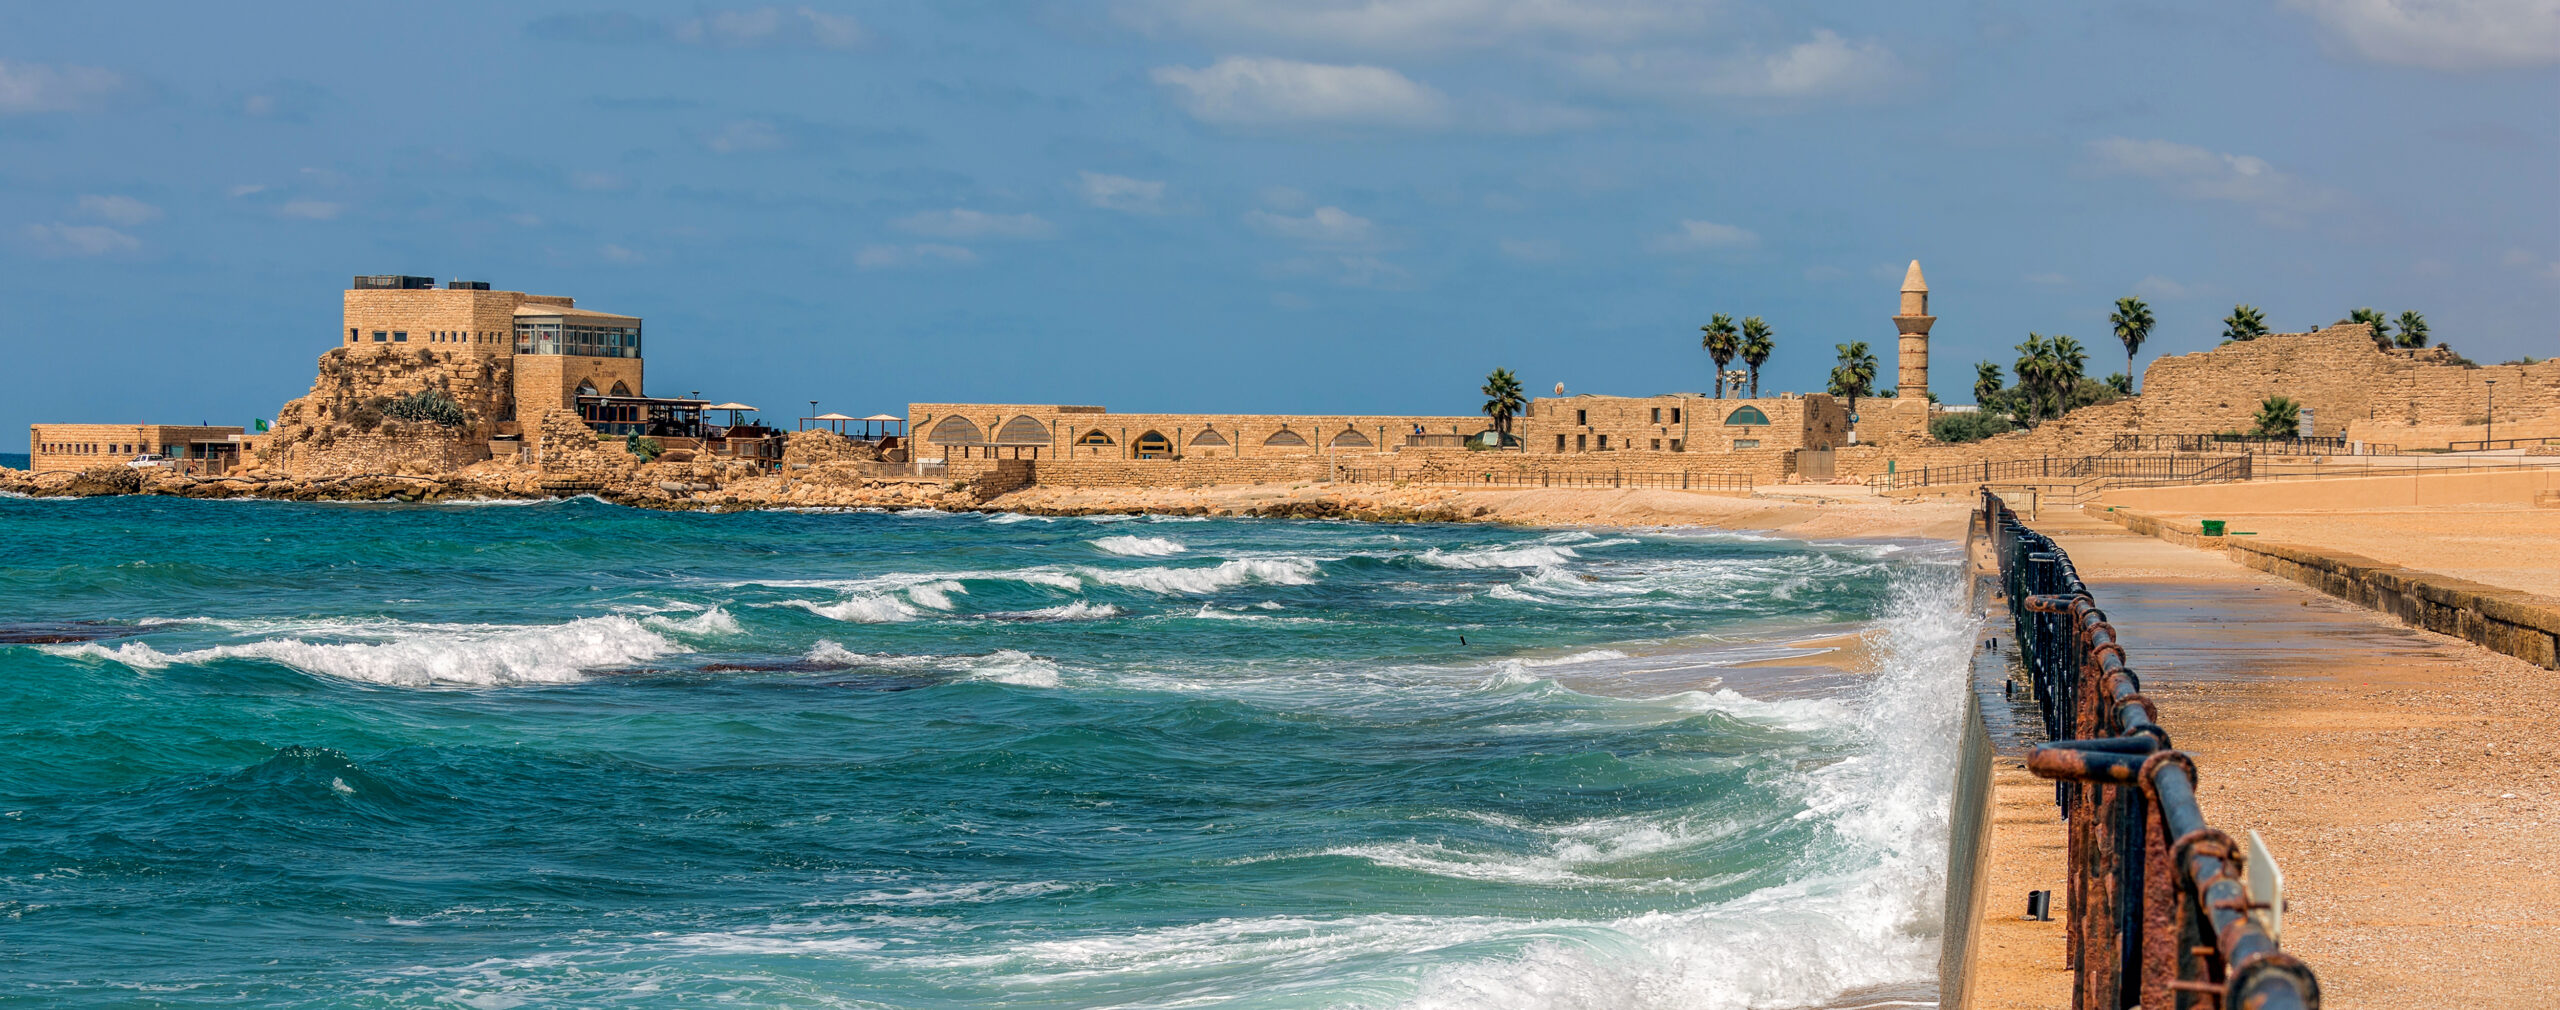 A,Panorama,Of,Quay,In,The,Ancient,City,Of,Caesarea,